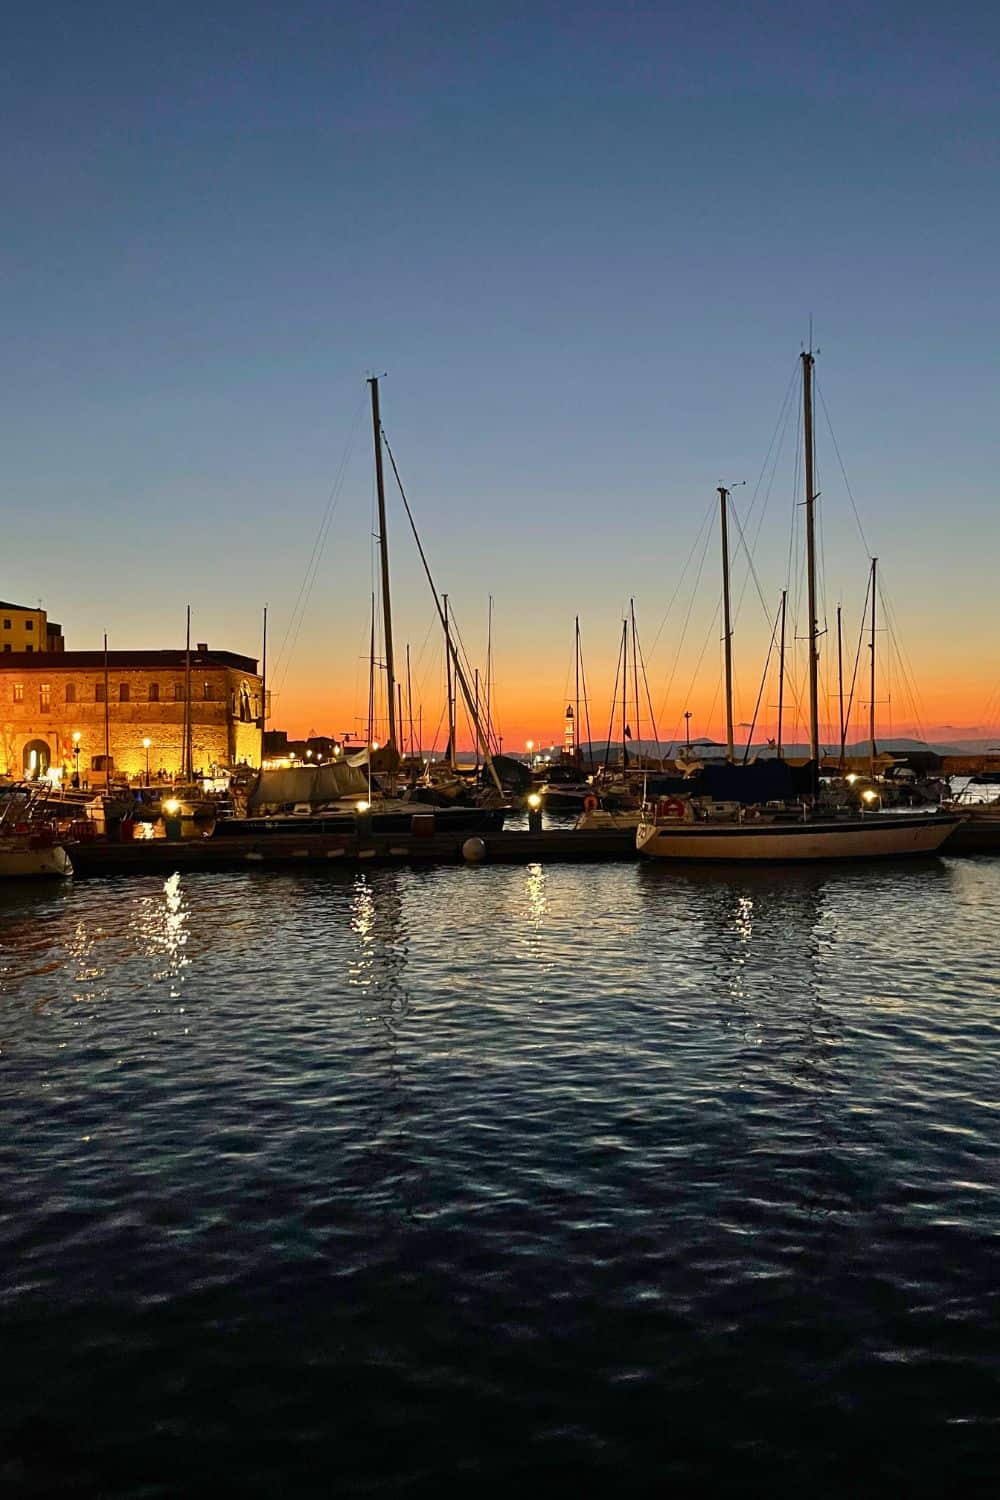 Twilight view of Chania harbor with silhouettes of moored sailboats against a sunset sky, reflecting gently on the calm sea